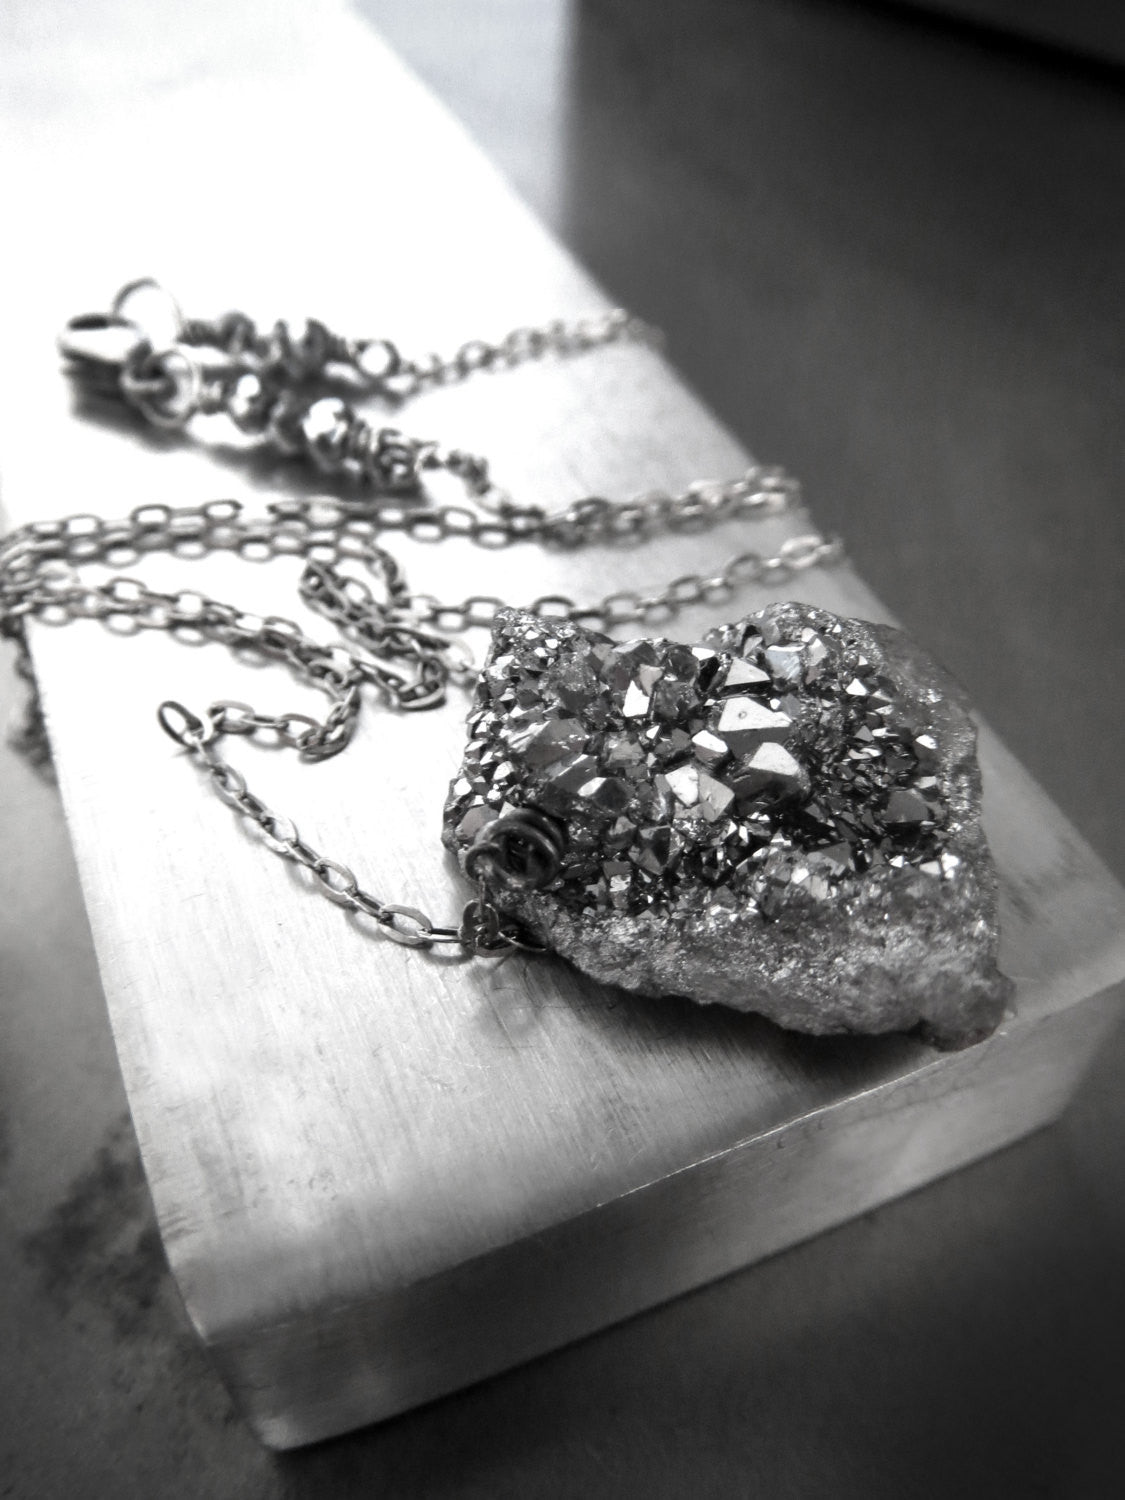 Rough Cut Druzy Necklace with Oxidized Sterling Silver